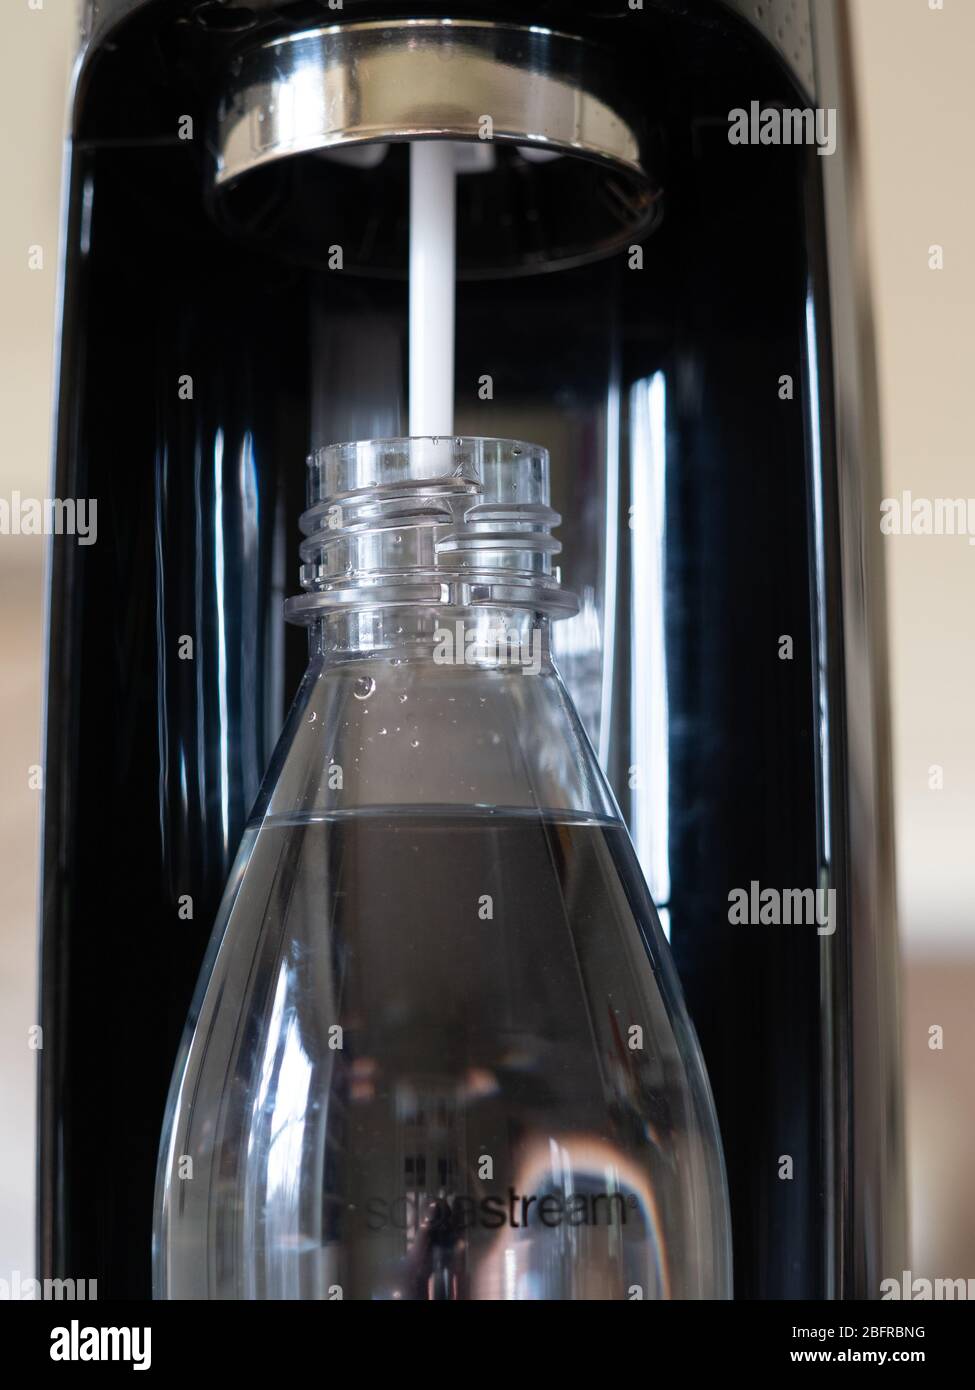 Close Up of black Sodastream carbonator and reusable Sodastream plastic bottle with water, photographed at eye level. Stock Photo